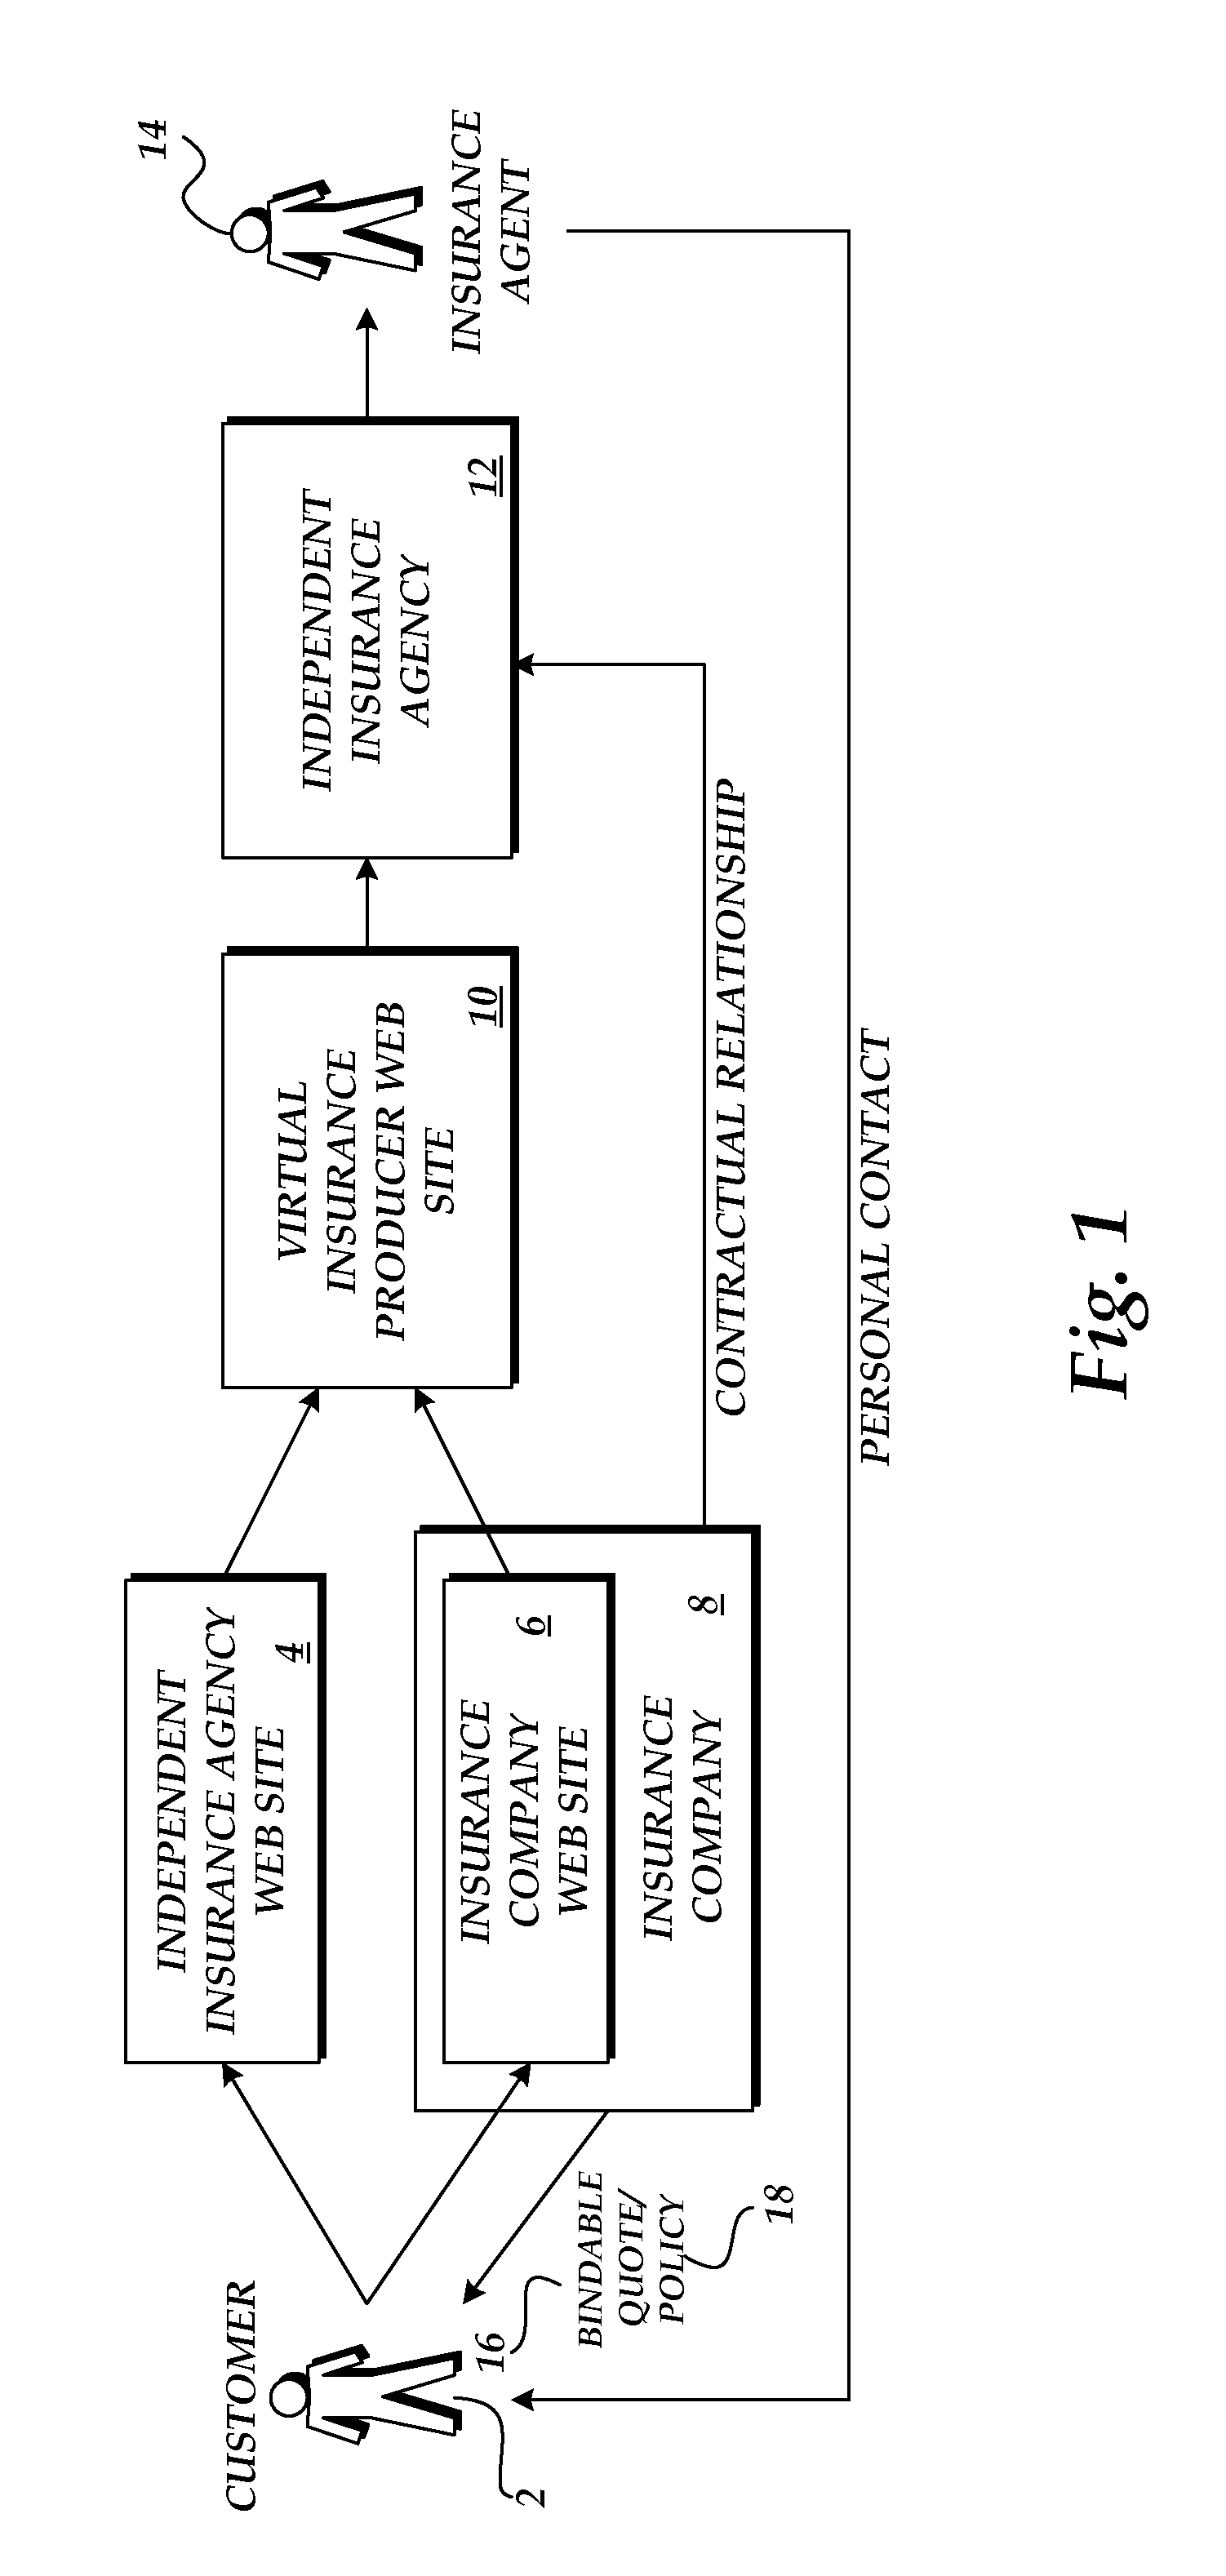 Method and system for providing insurance policies via a distributed computing network